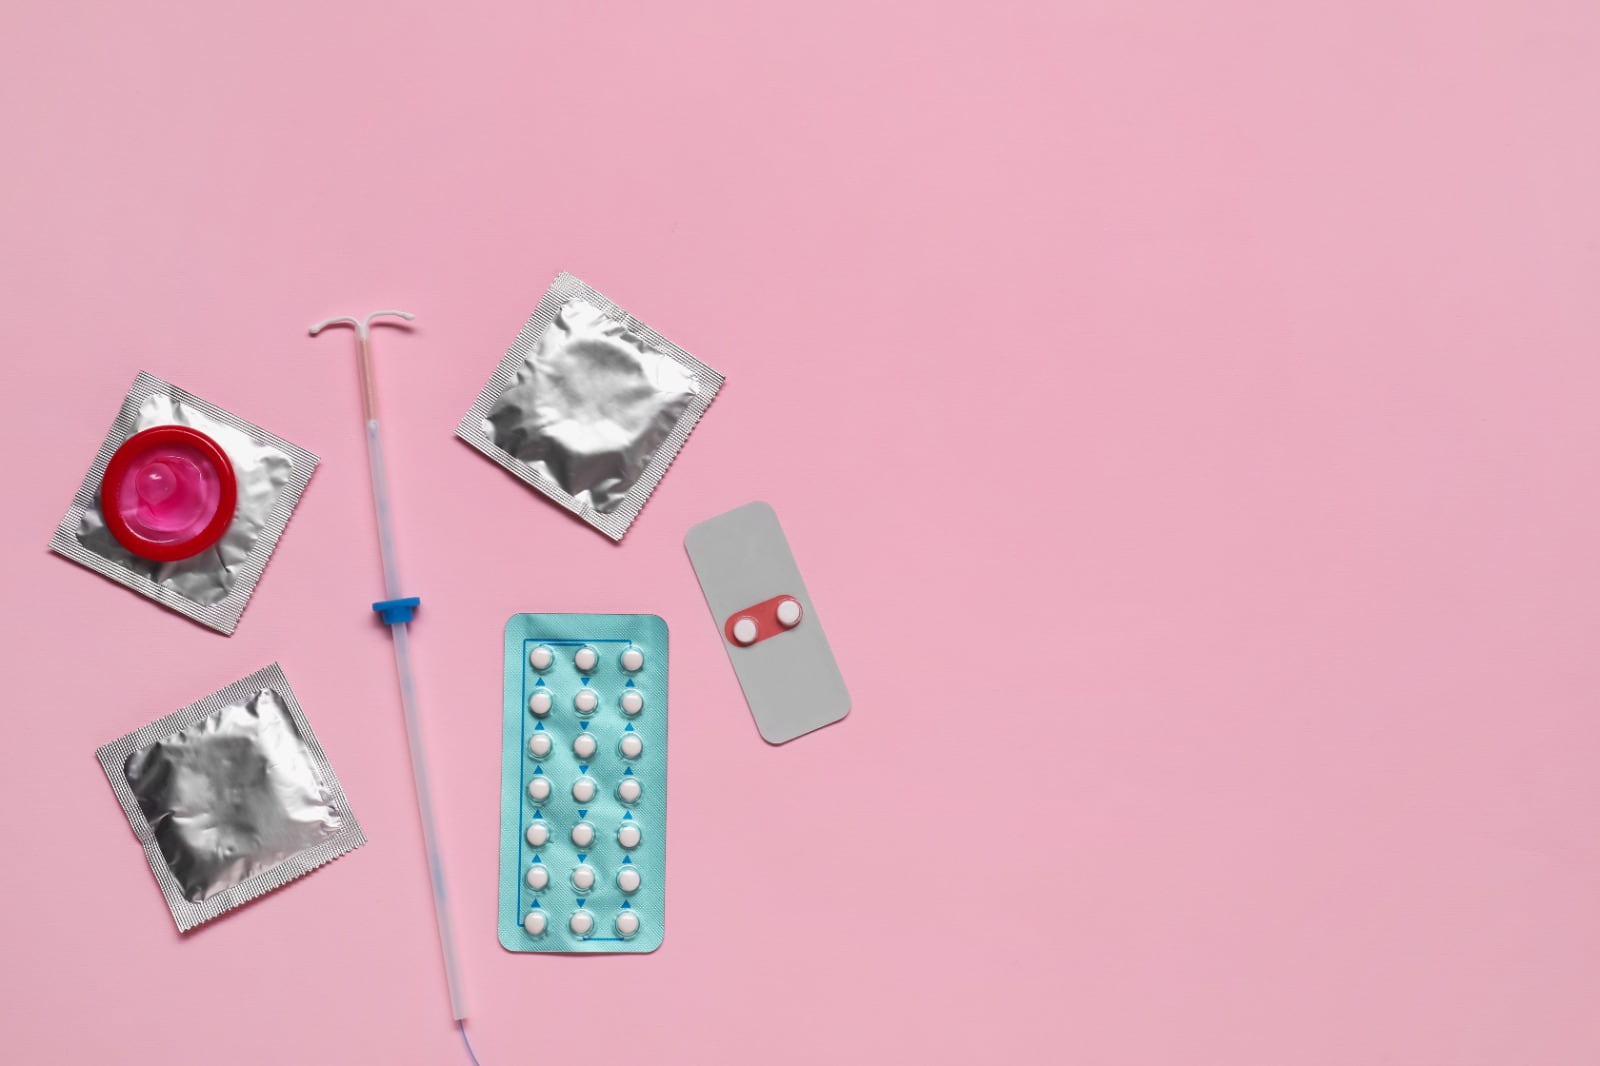 Promoting better awareness of emergency contraception in the UK